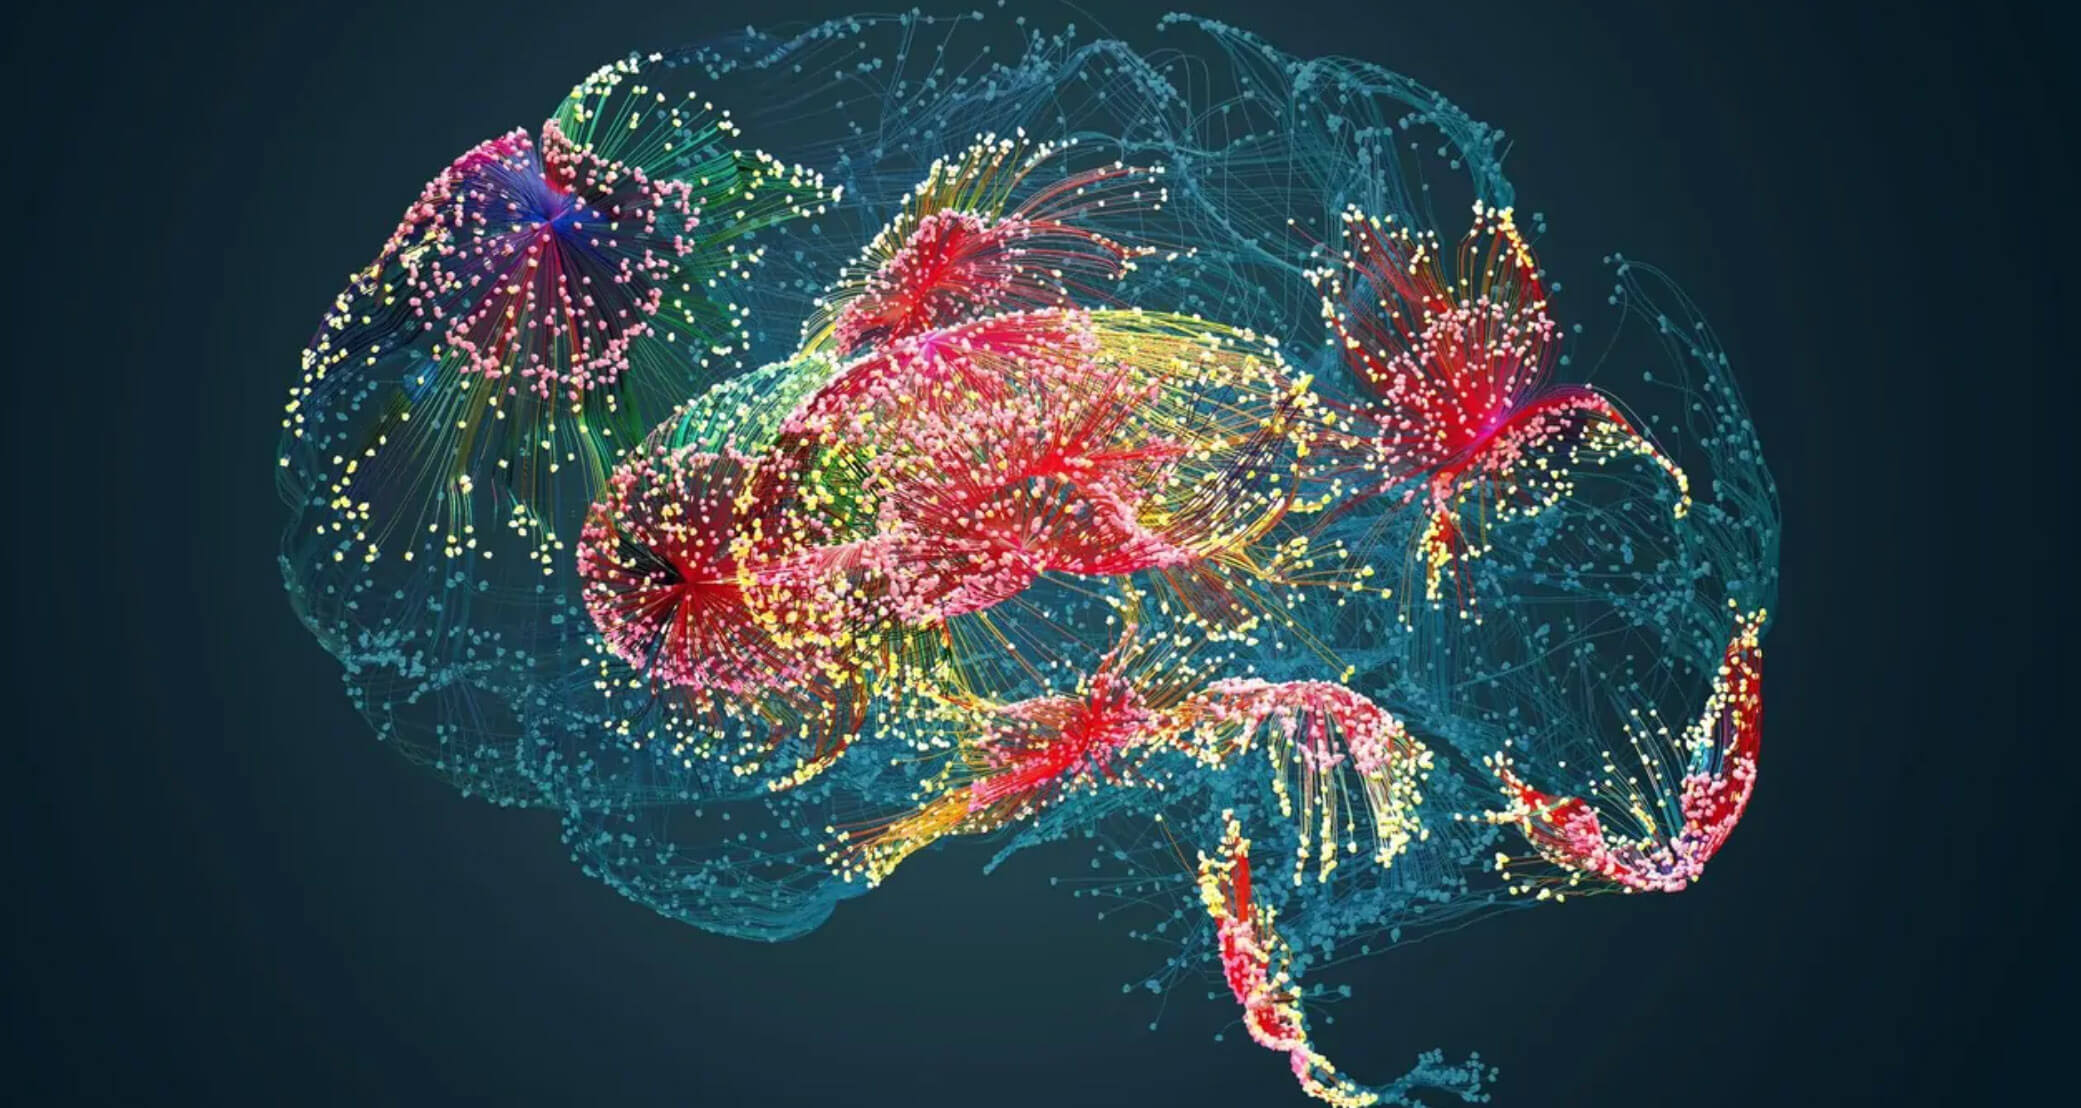 Colorful brain image reconstruction